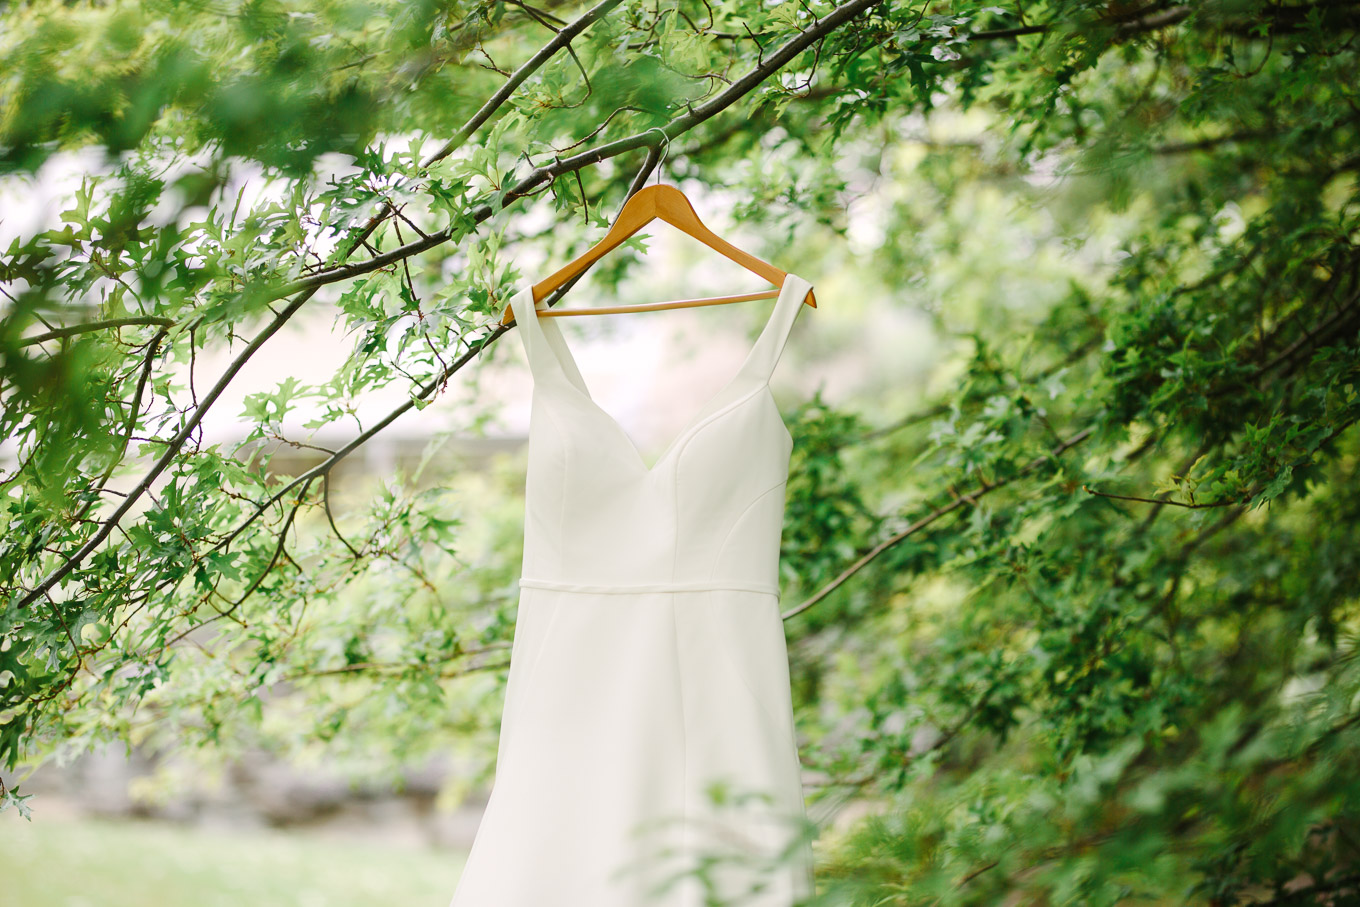 Bride's dress hanging among the trees. Millbrook Resort Queenstown New Zealand wedding by Mary Costa Photography | www.marycostaweddings.com